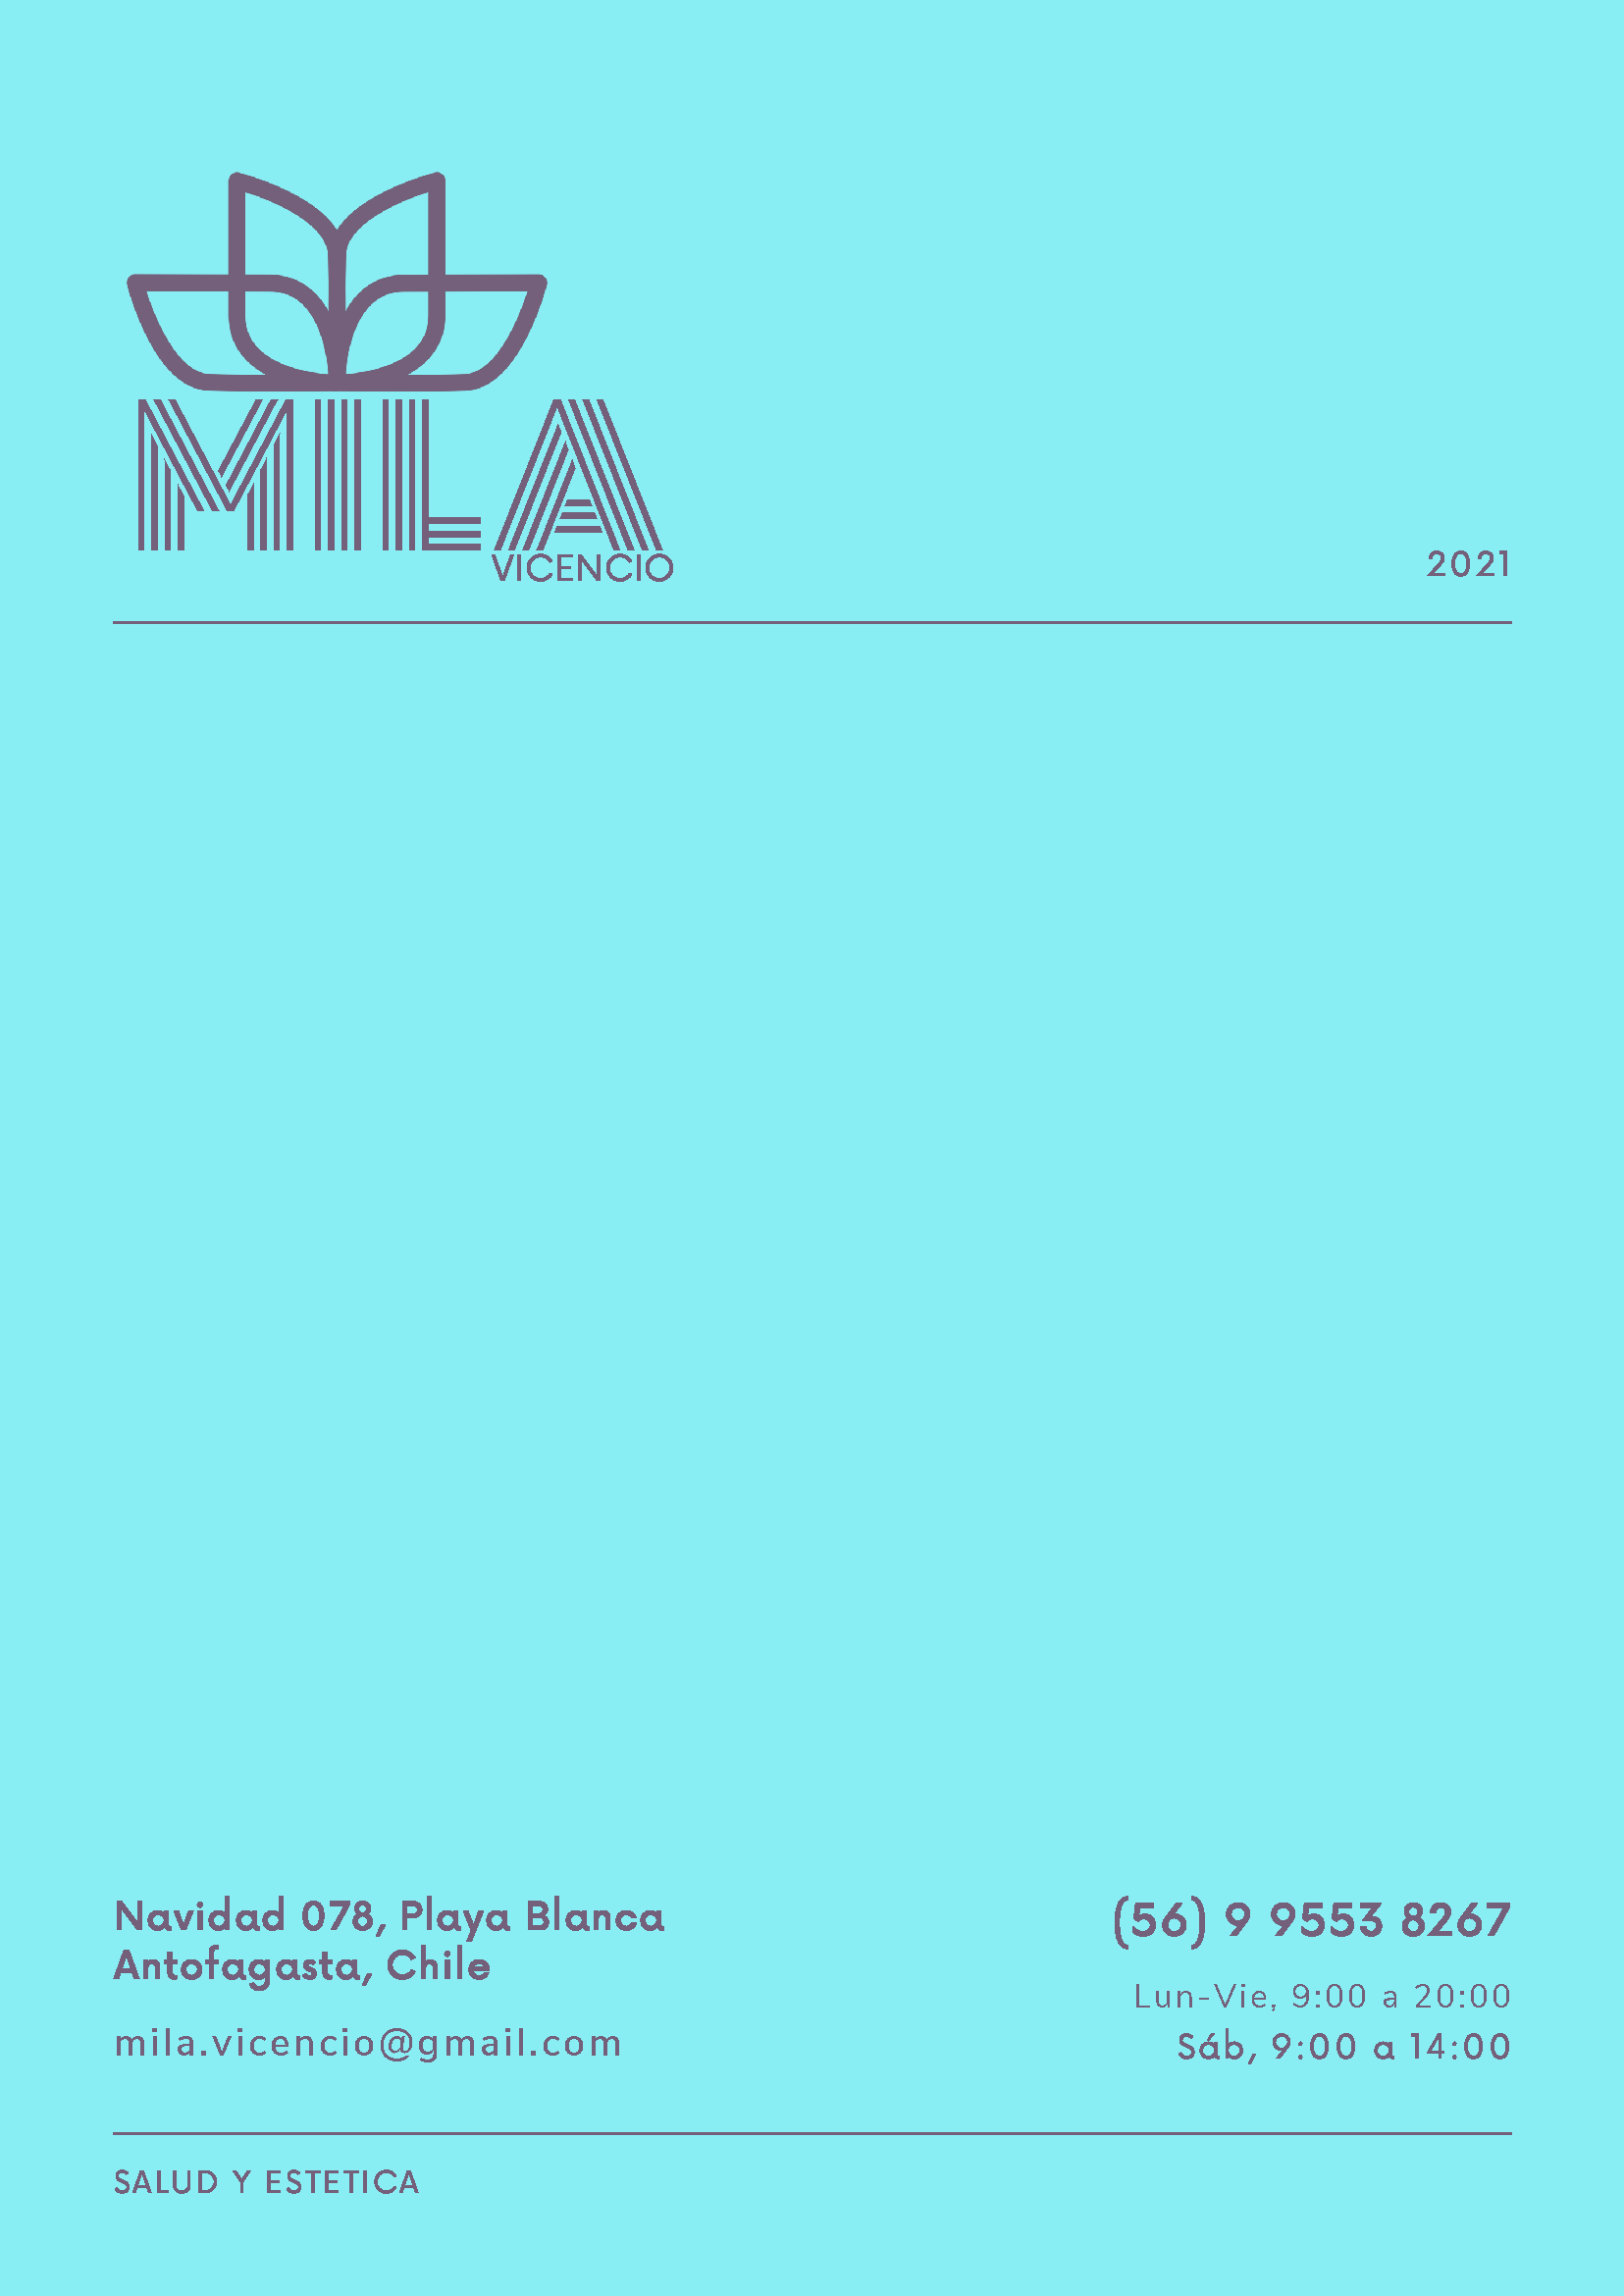 Mila Brand Business Proposal_Page_1.png